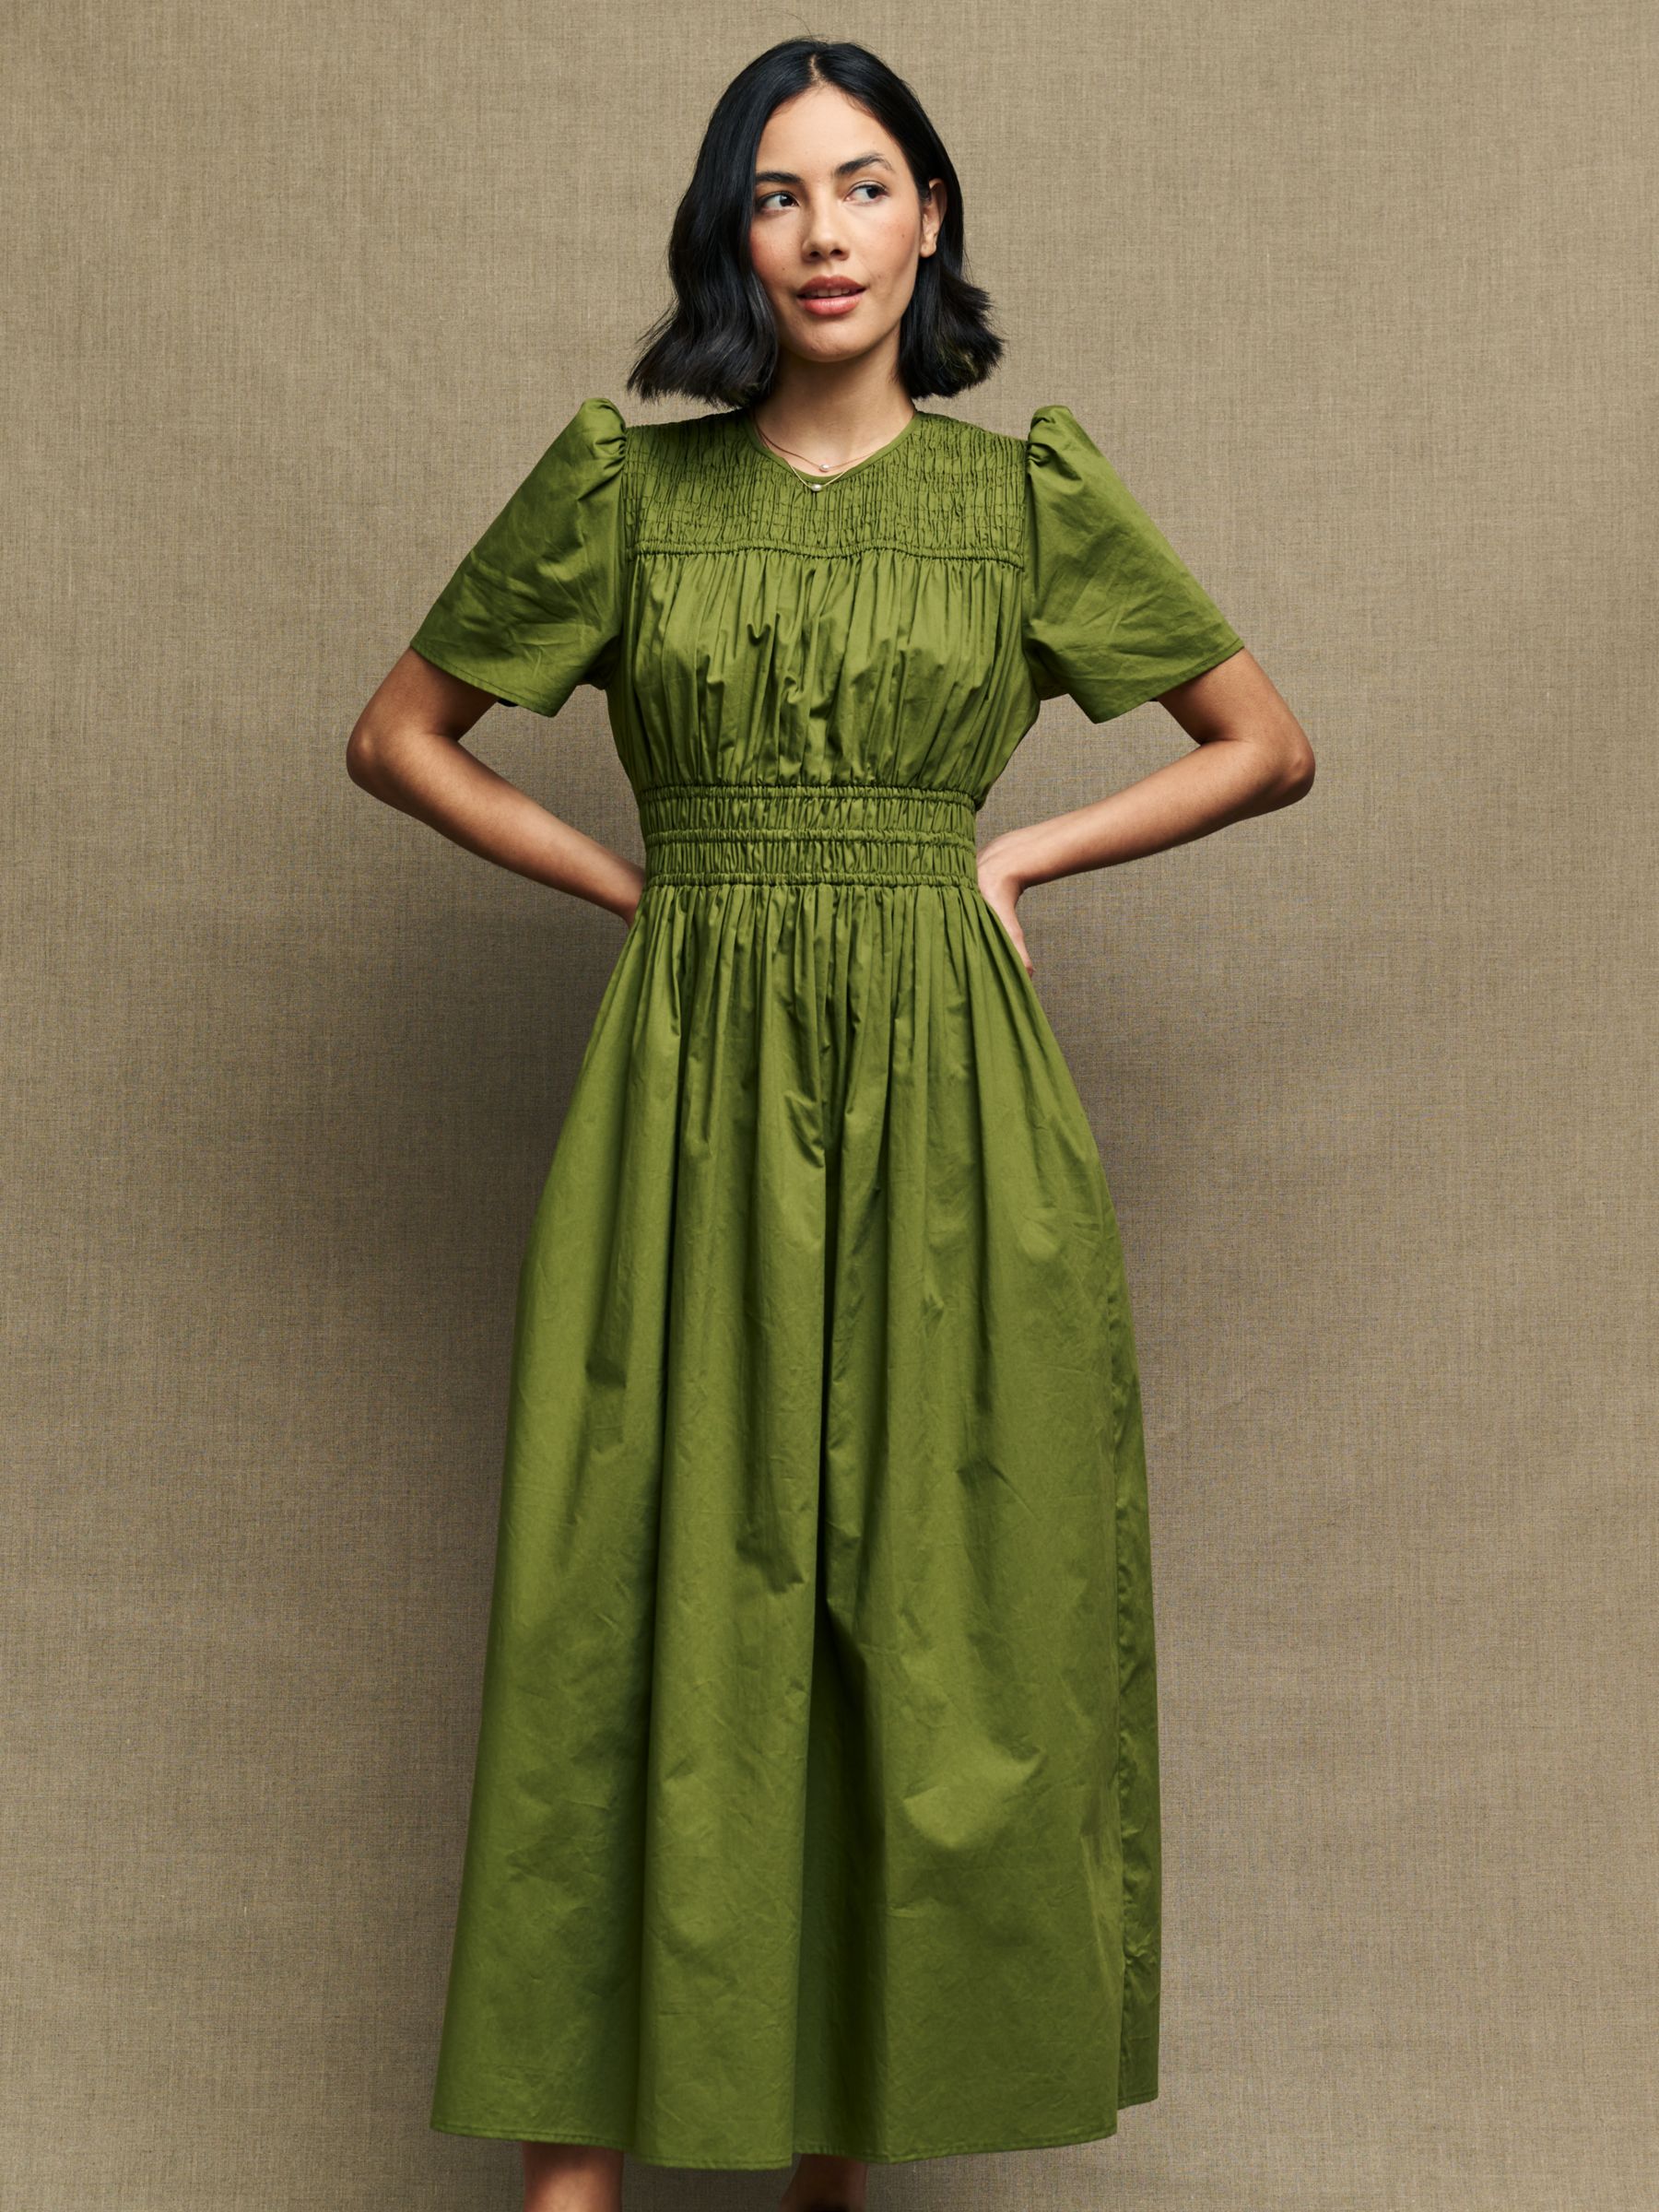 Buy Green 100% Cotton Knot Summer Maxi Dress from the Next UK online shop